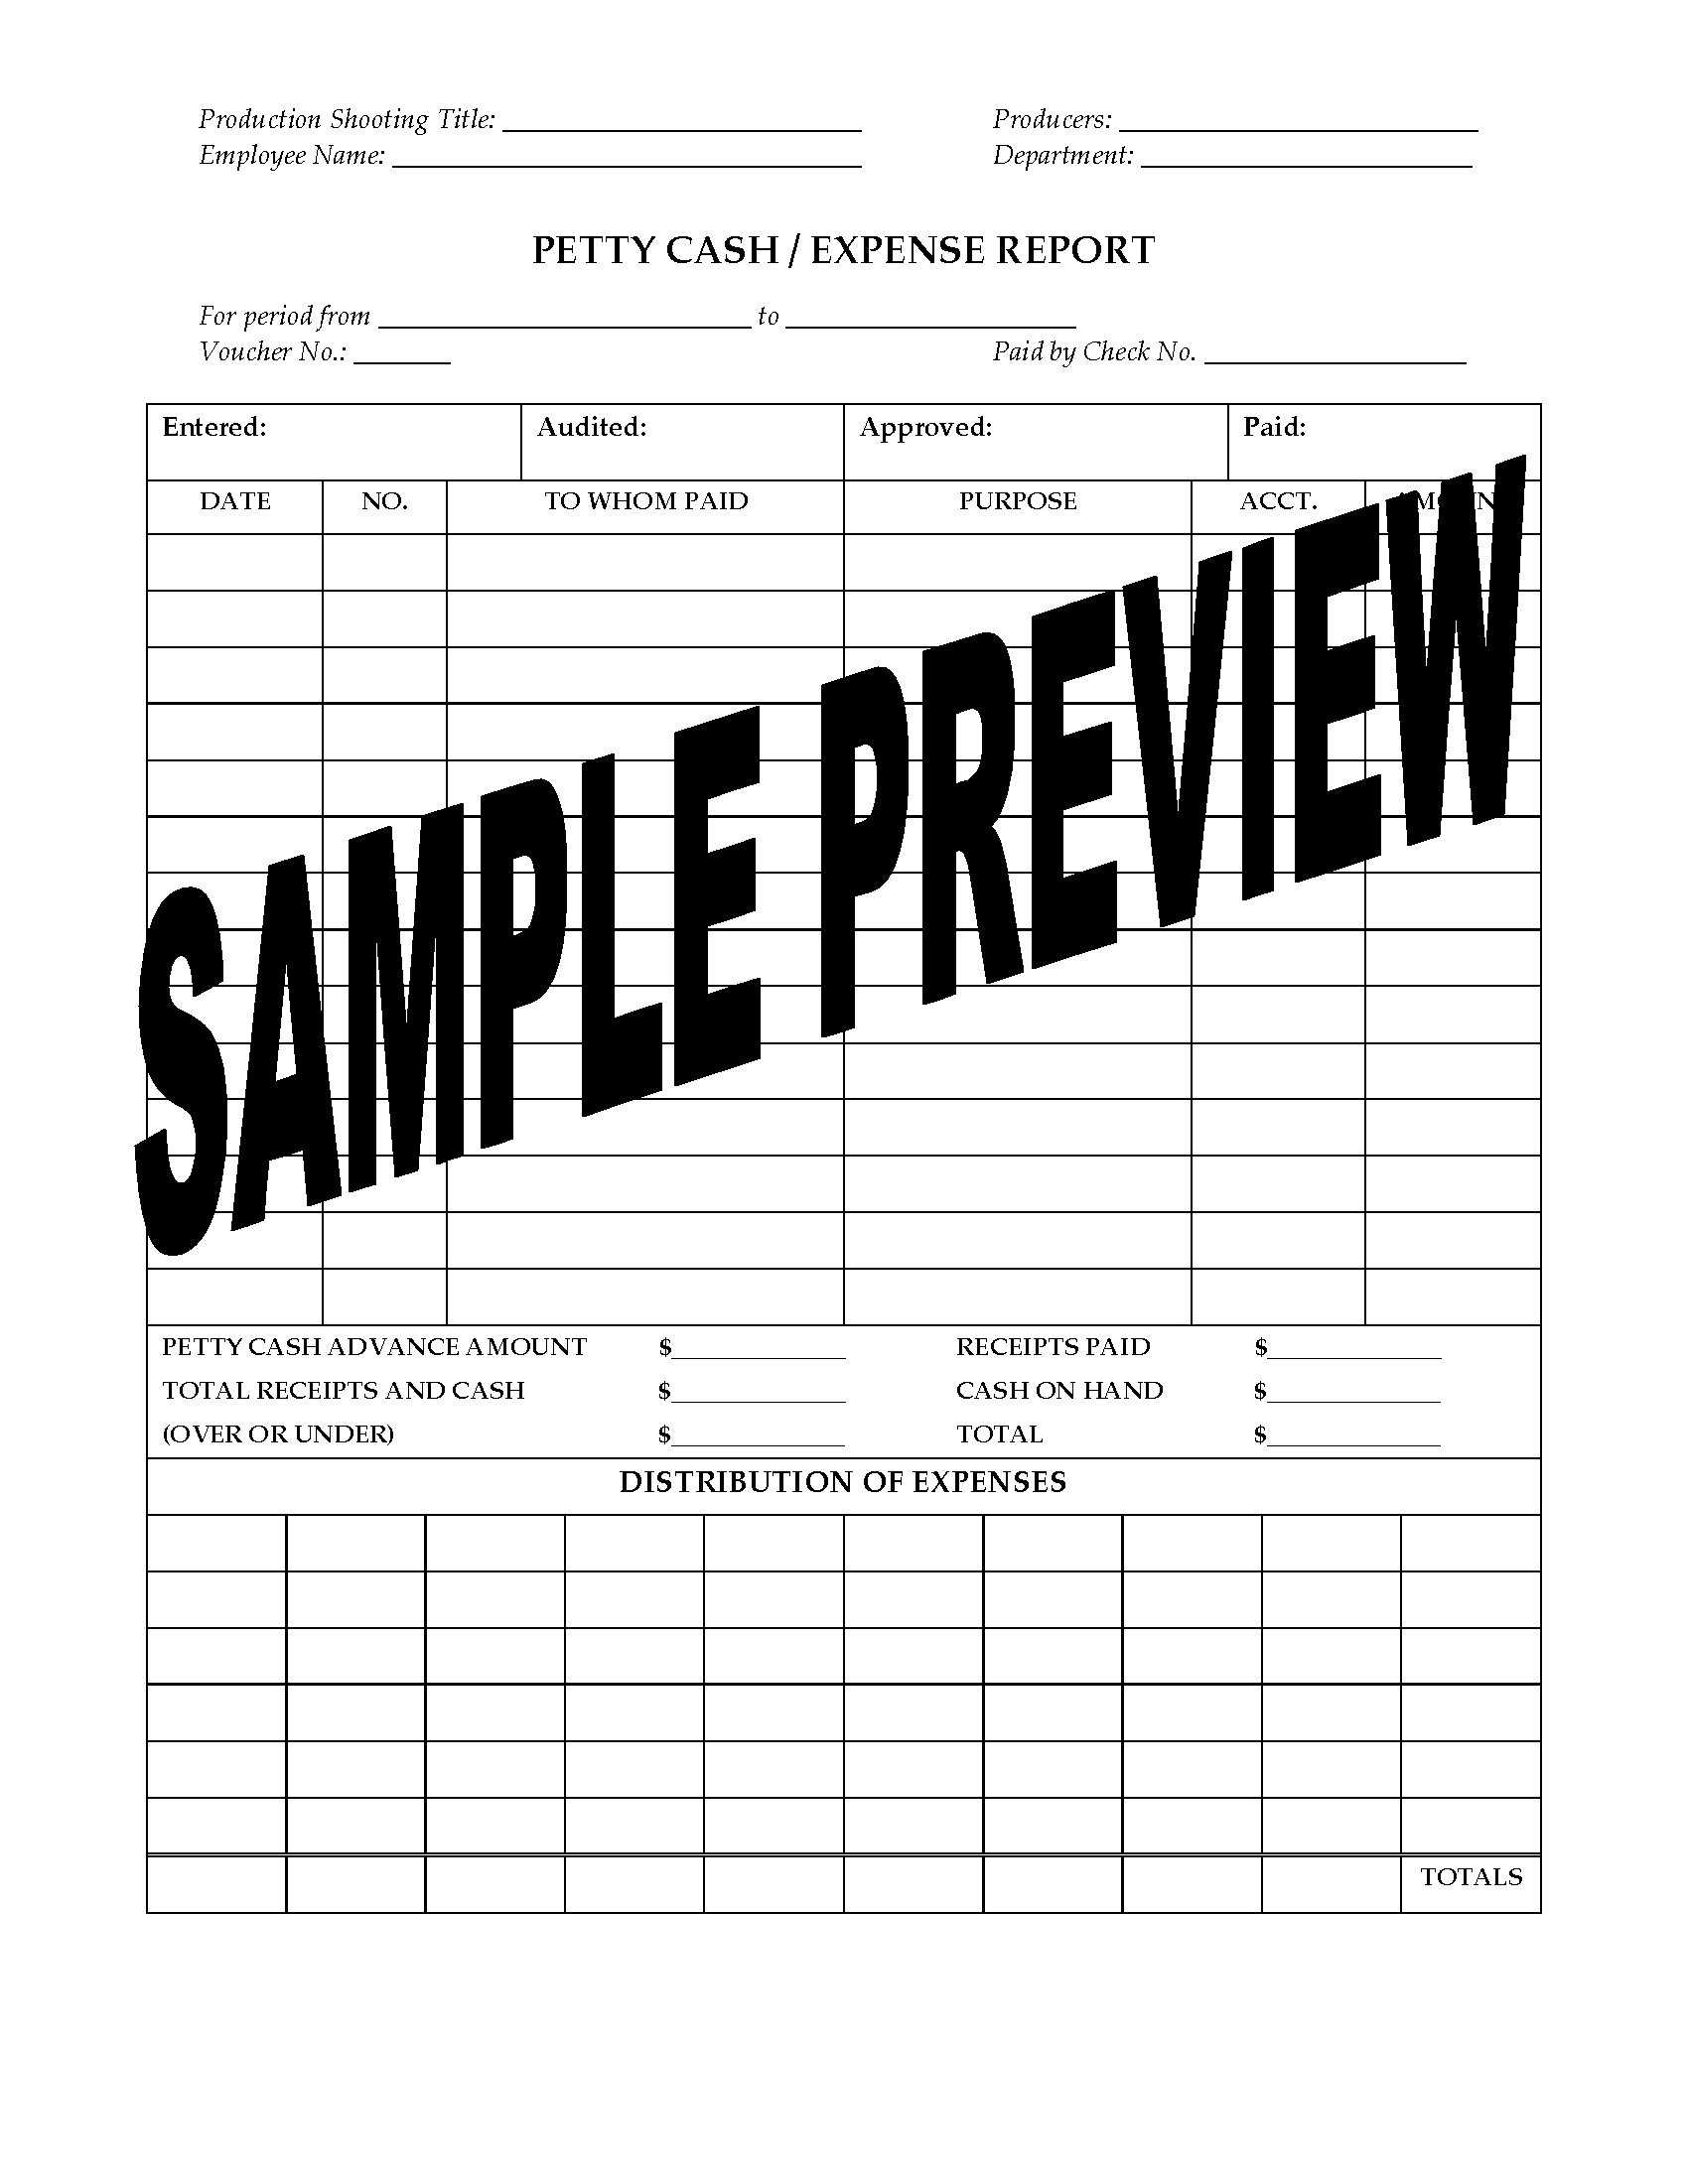 Petty Cash Expense Report For Film Or Tv Production With Regard To Petty Cash Expense Report Template